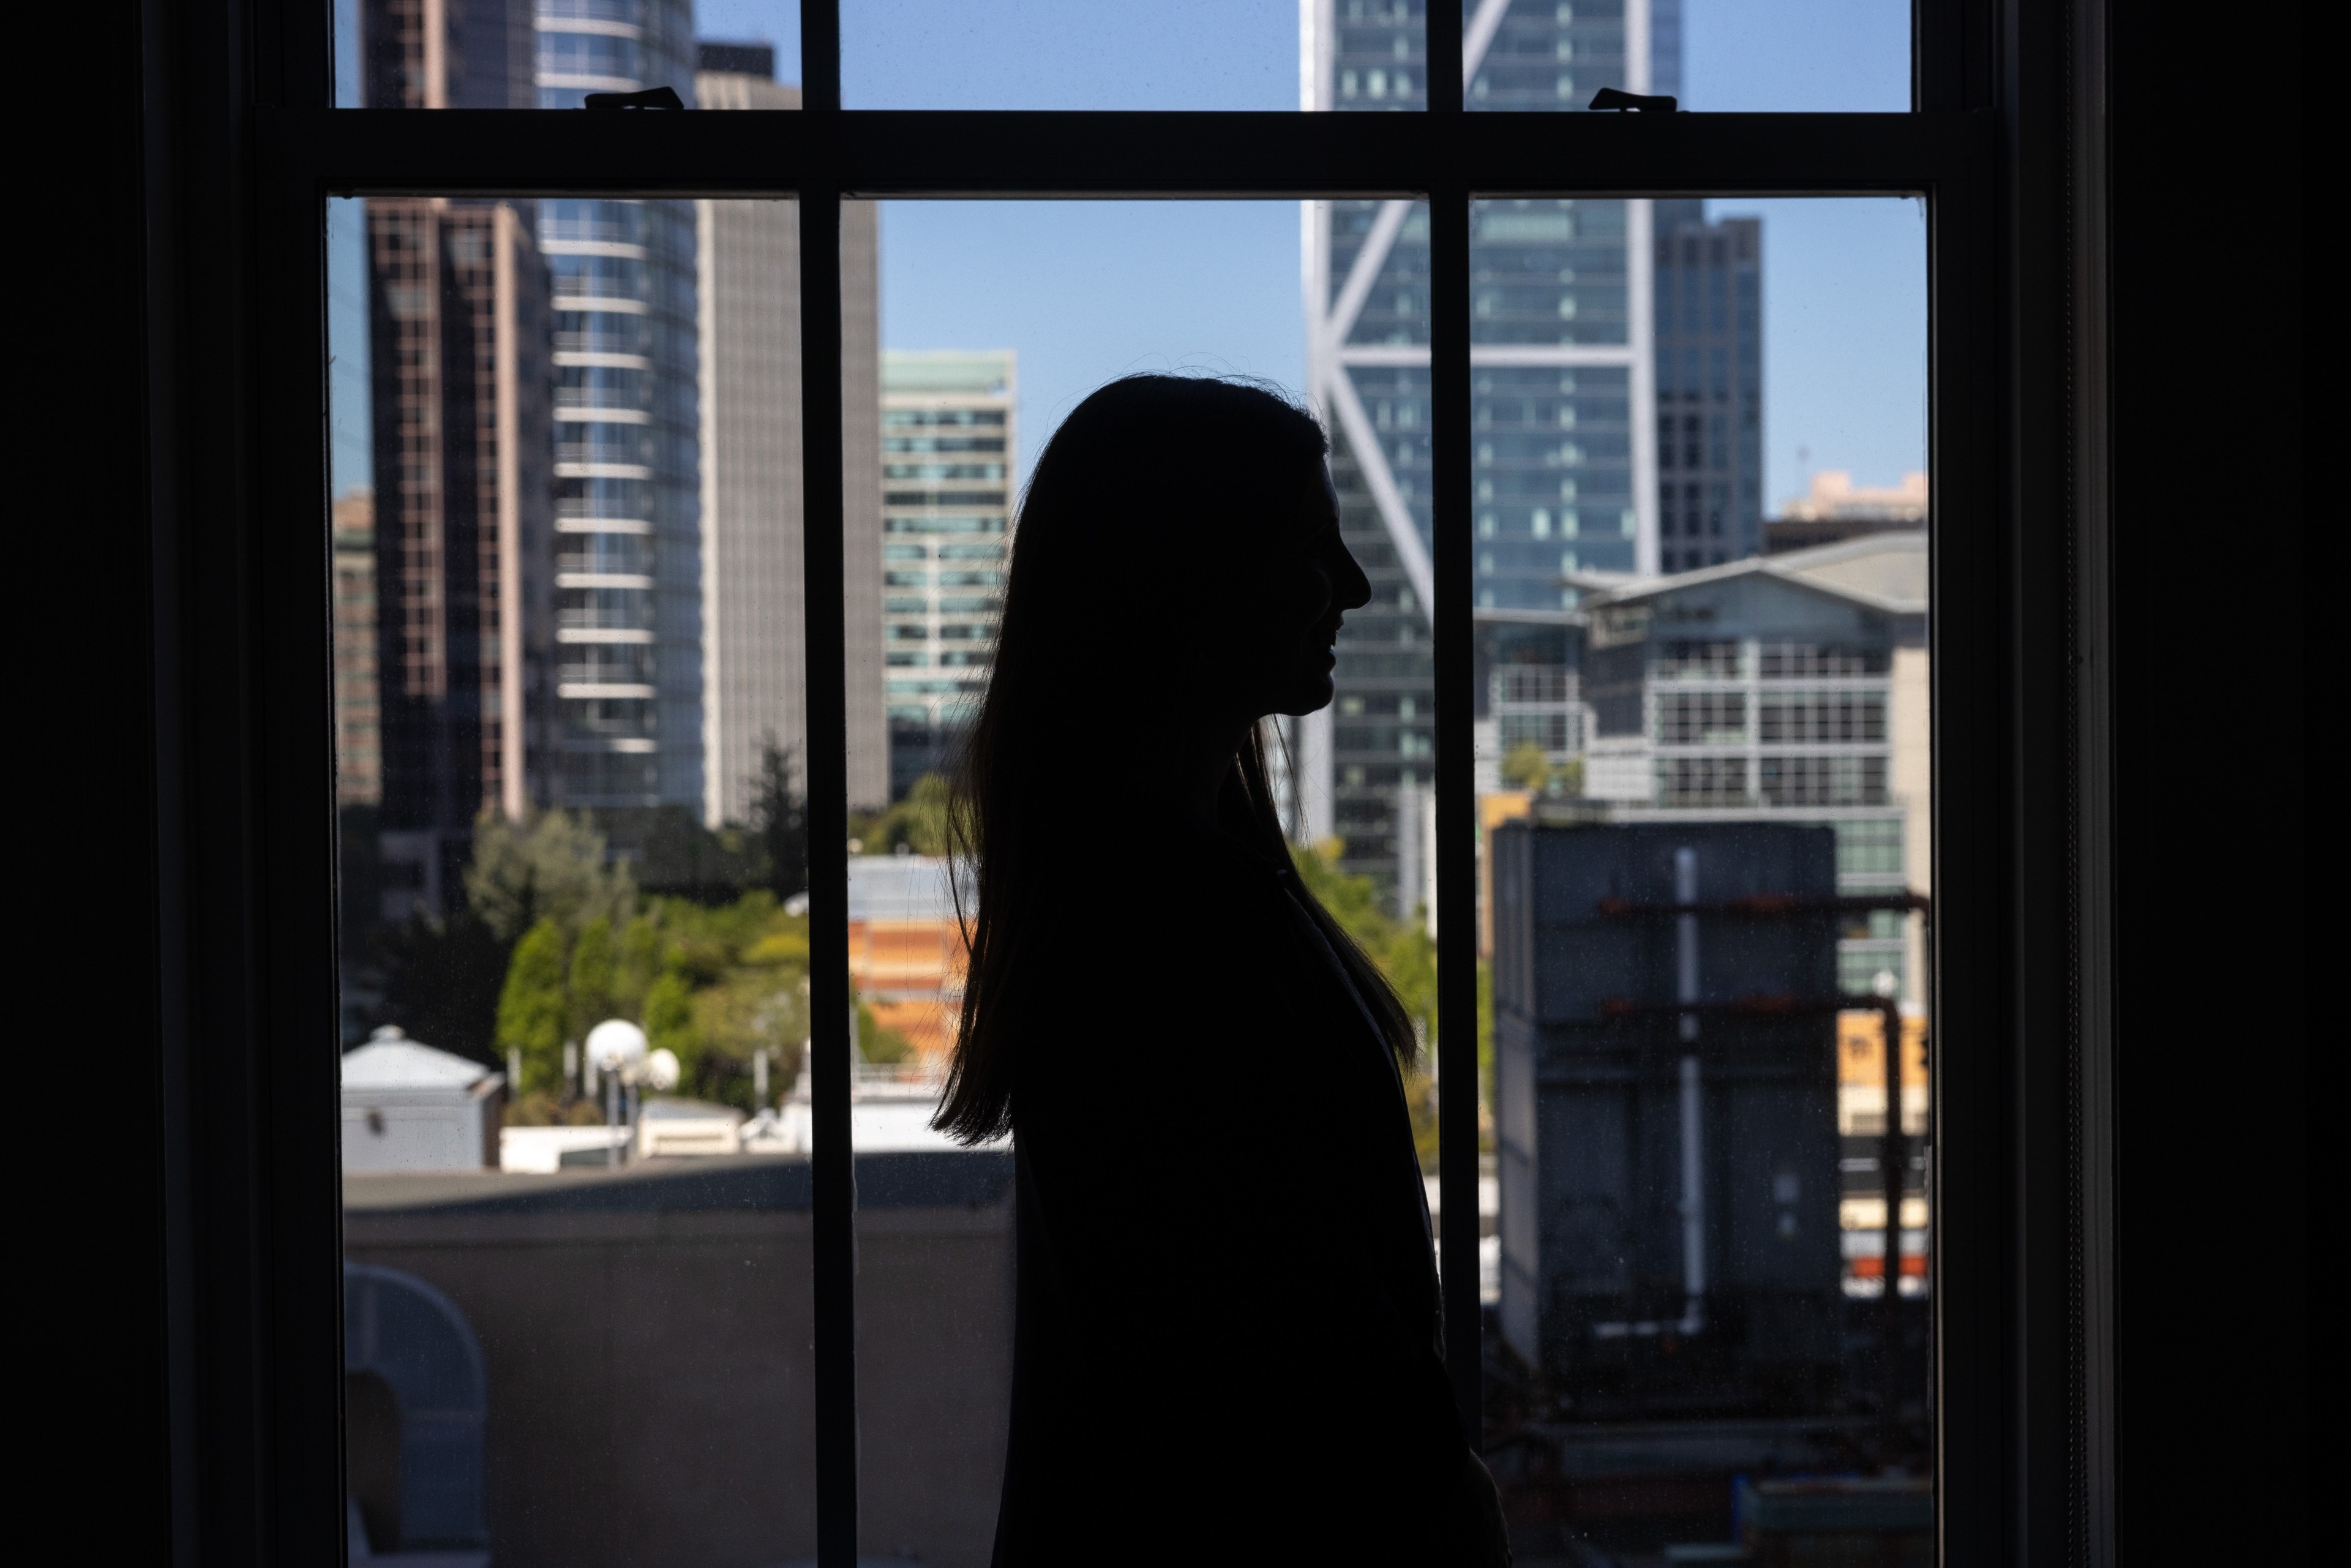 A silhouetted person stands in front of a large window with a city skyline comprising various modern high-rise buildings in the background.